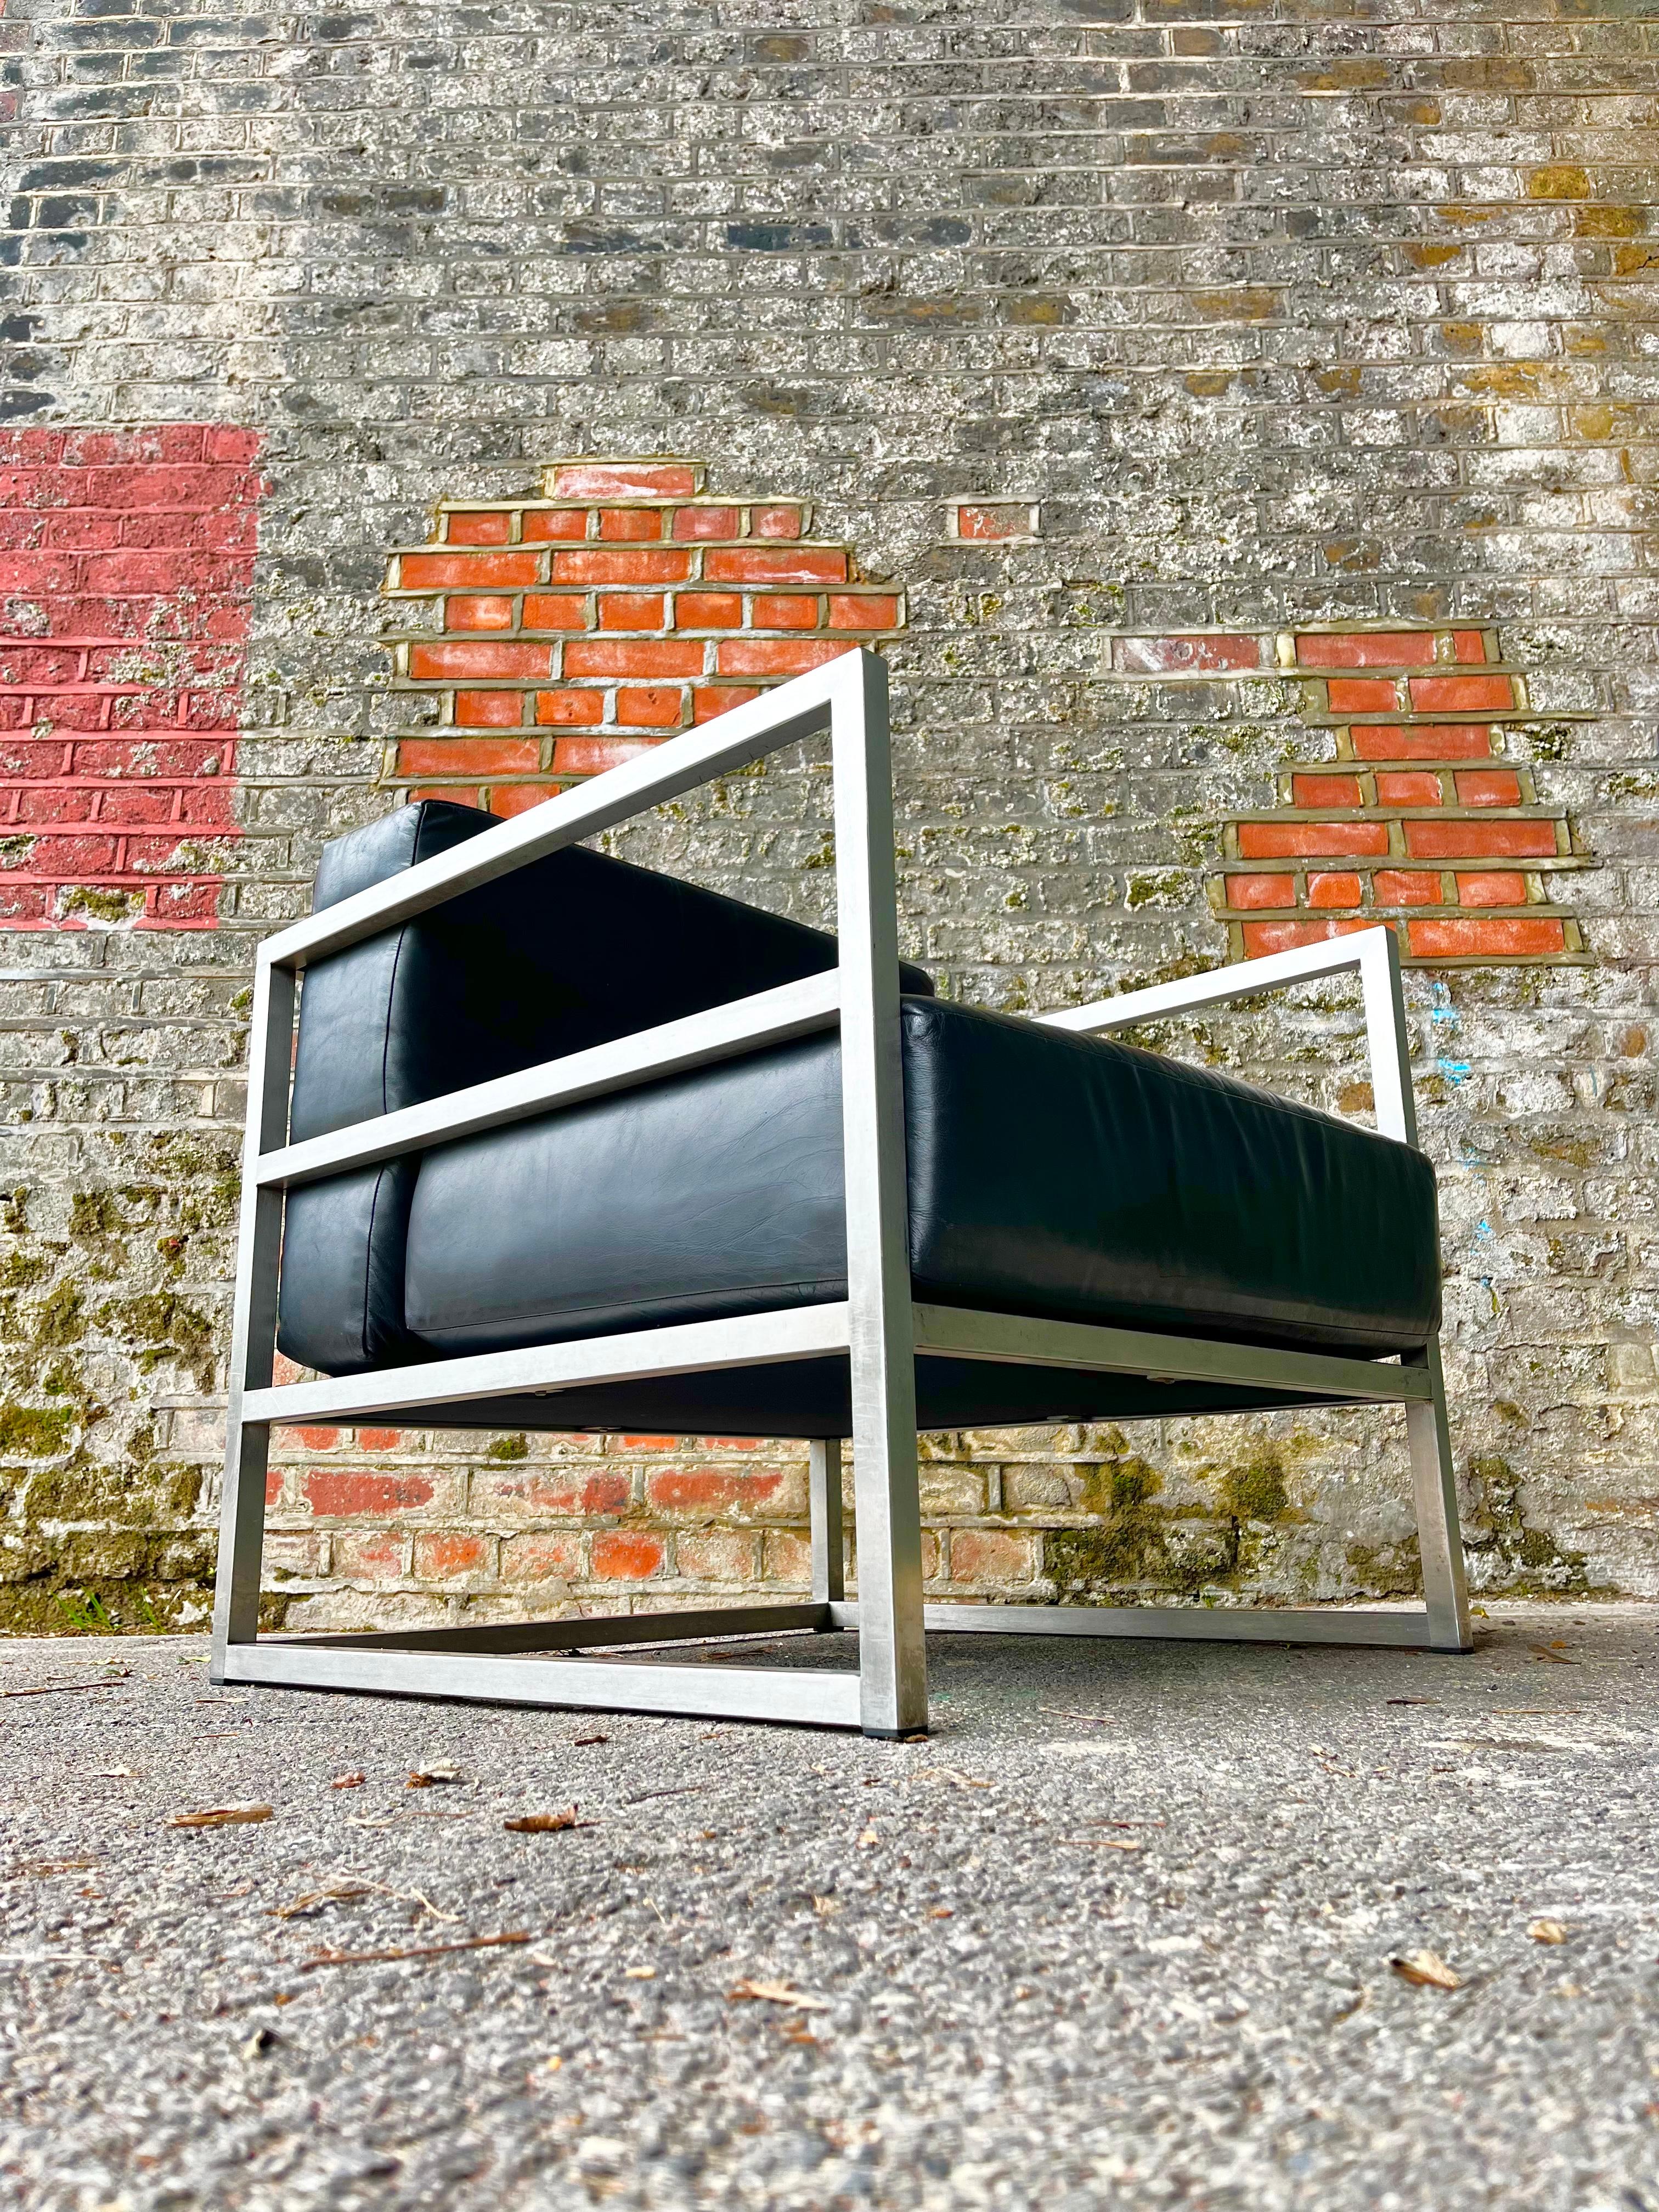 This unique and rather severe looking pair of 20th Century armchairs wouldn’t look out of place on the set of a Sci-fi movie…
Reminiscent of the Le Corbusier LC2 Bauhaus era design, the super sharp welded steel frames are paired with angular leather